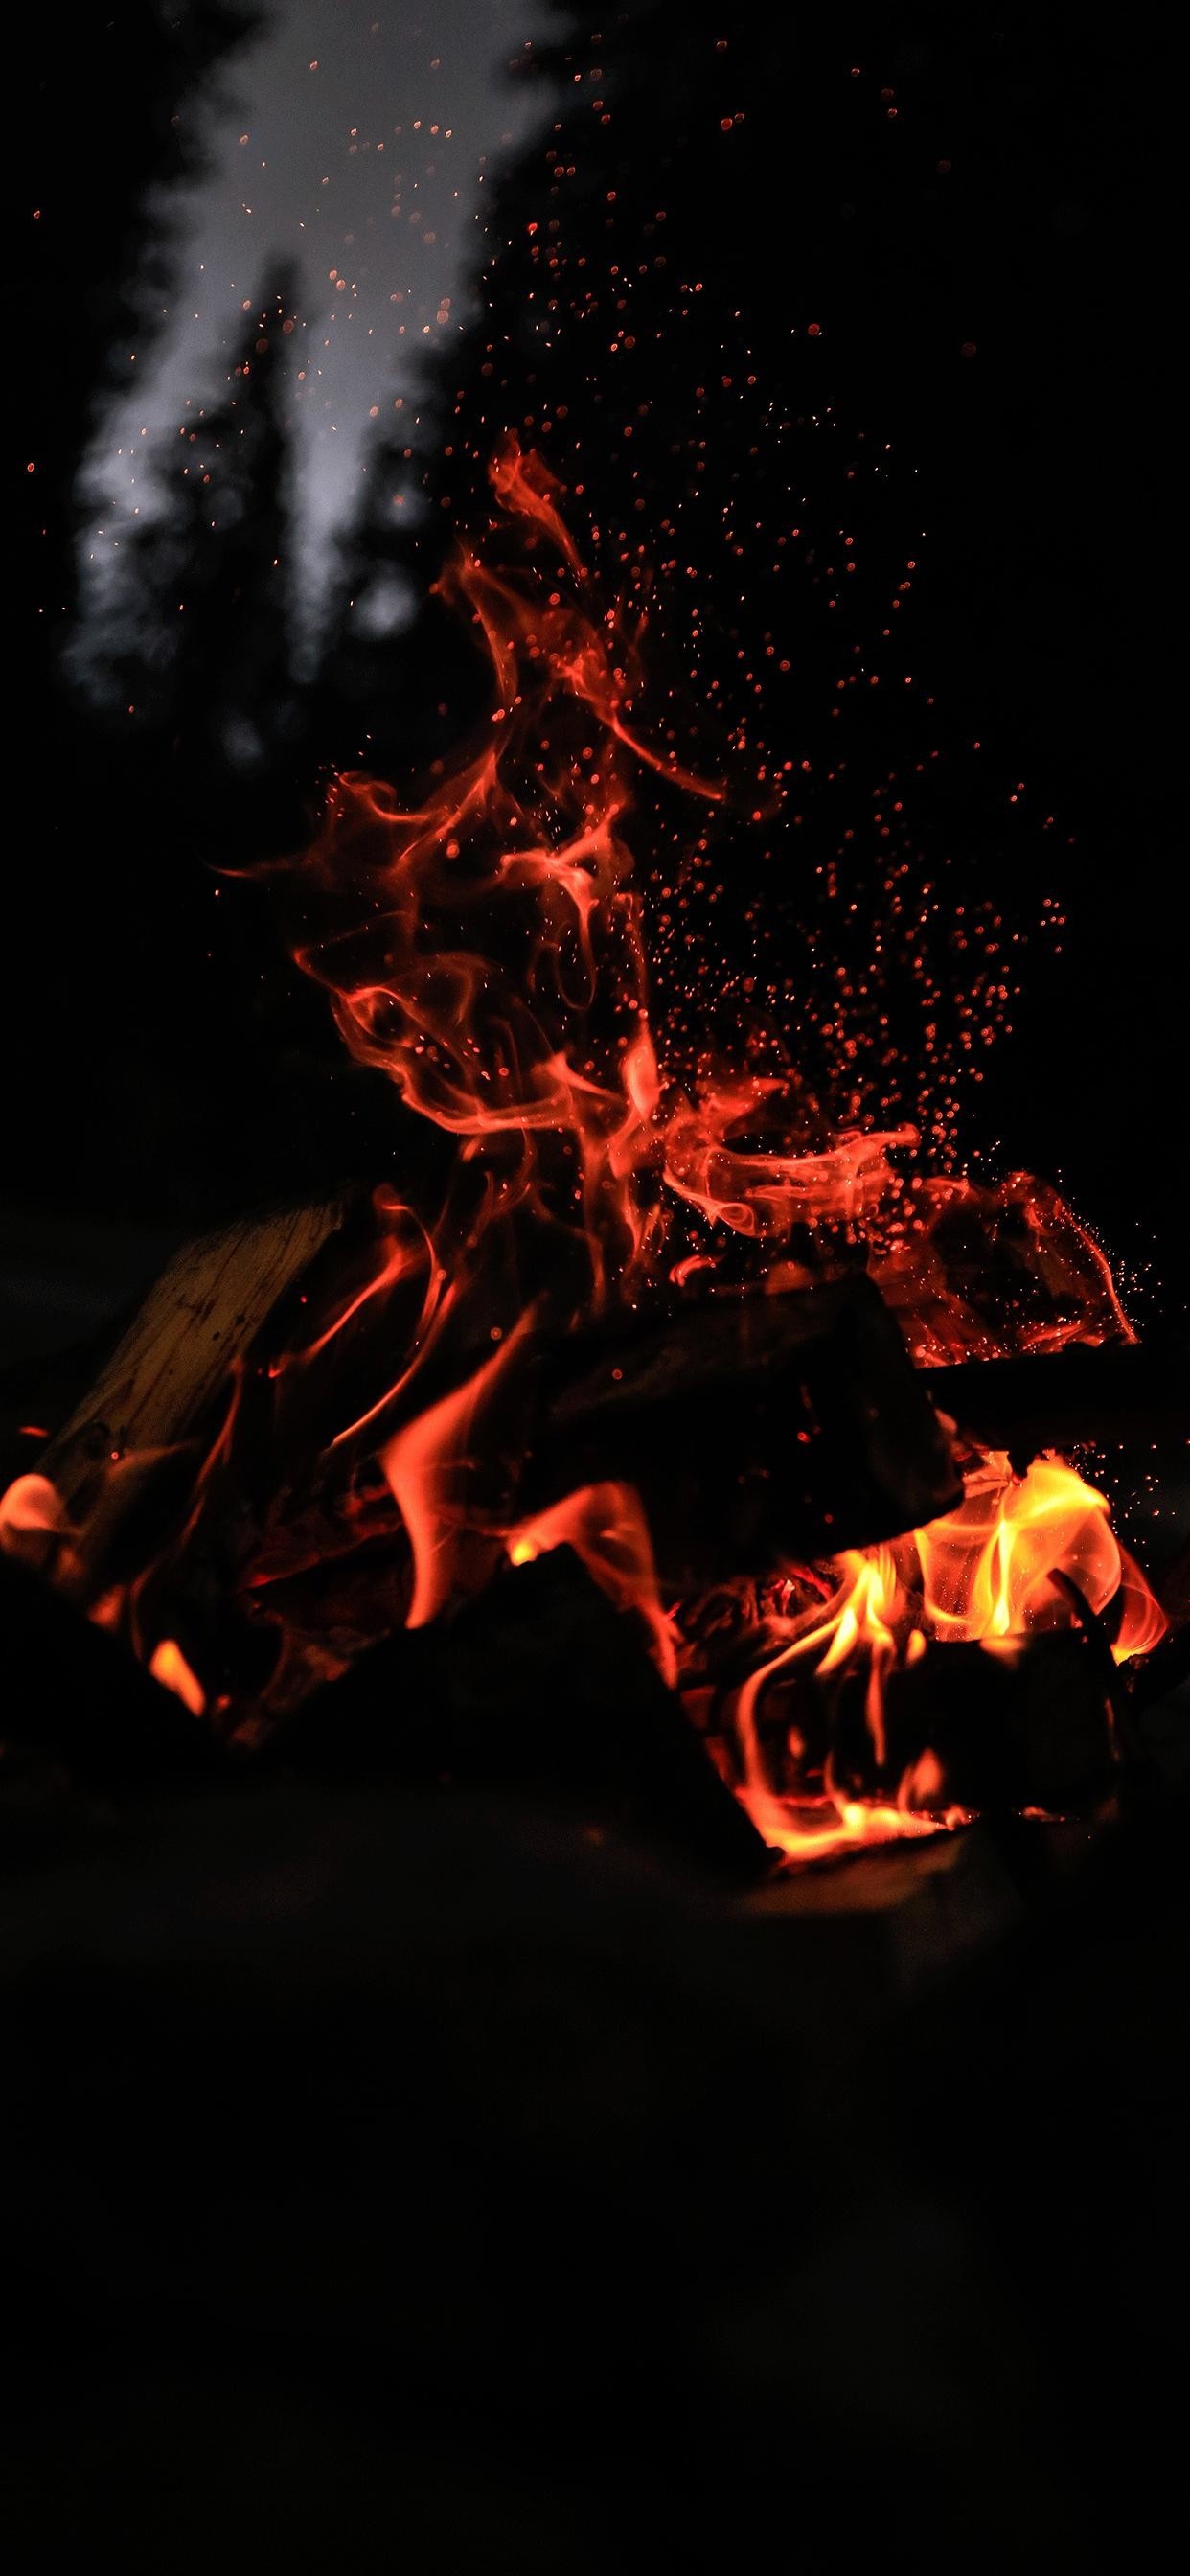 Fire wallpapers, Stunning visuals, Intense flames, Dynamic backgrounds, Captivating fire, 1250x2690 HD Handy